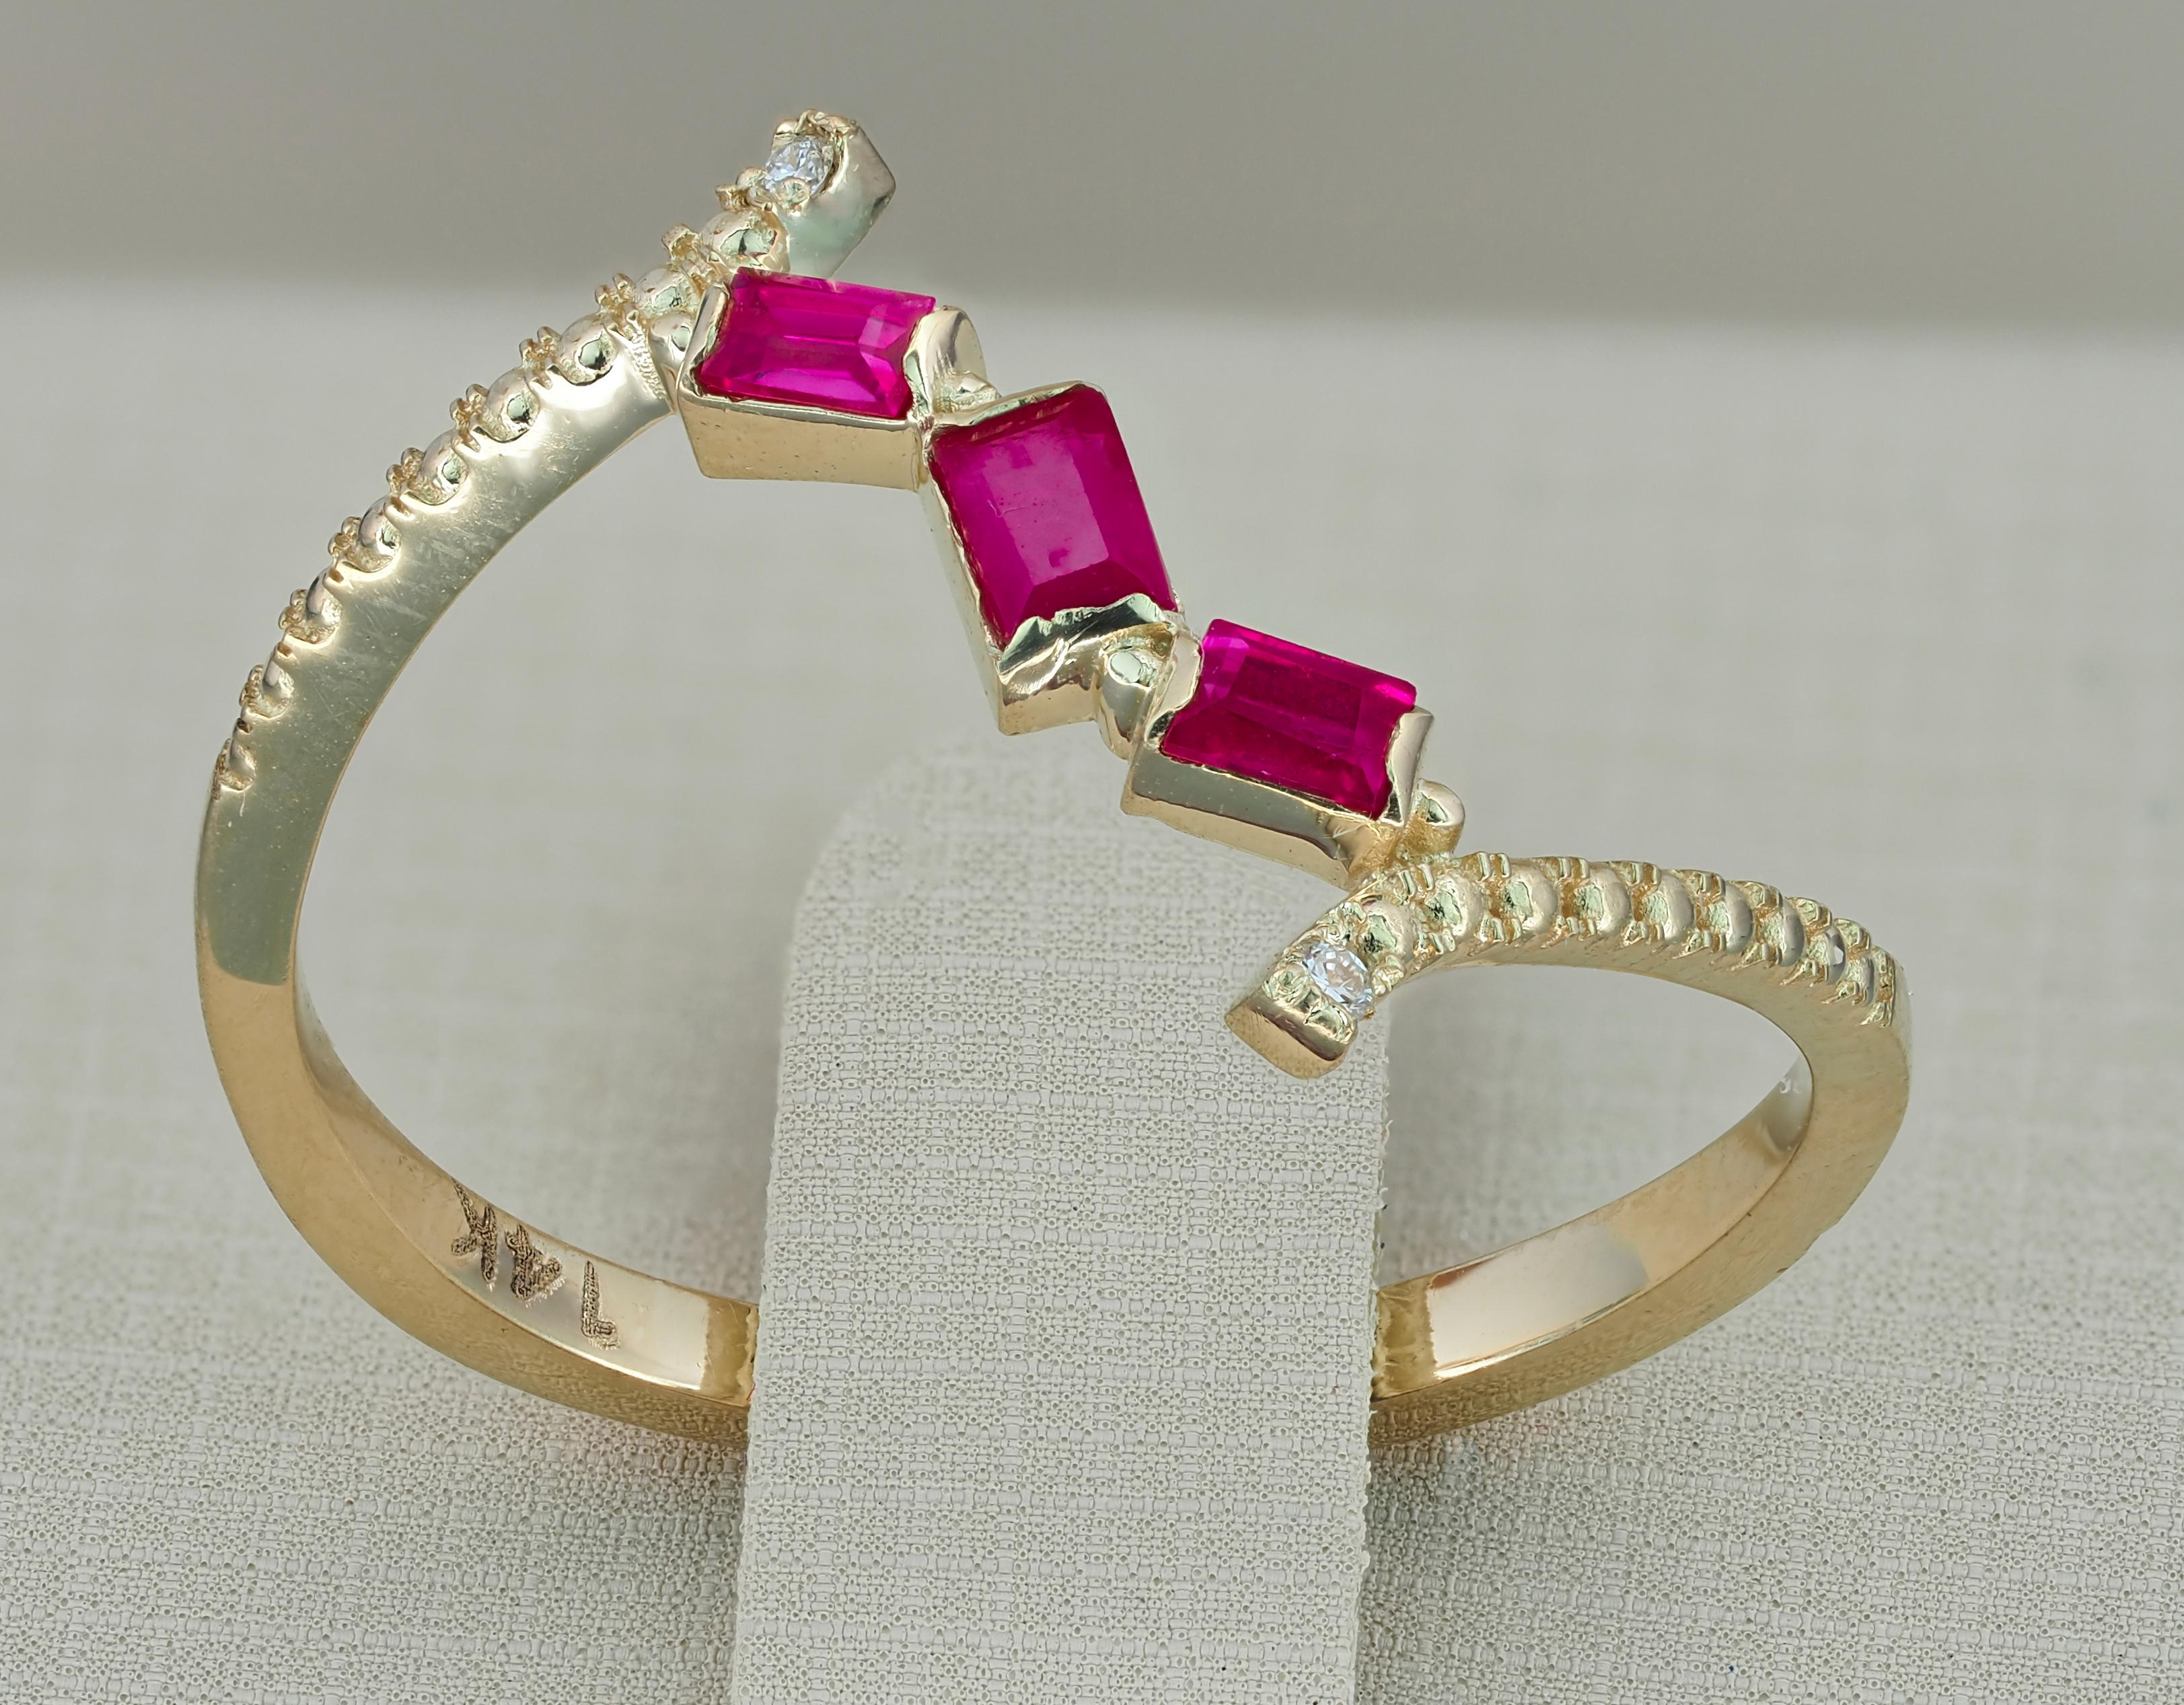 Women's 14k Gold Ring with Rubies and Diamonds, Baguette Ruby Ring